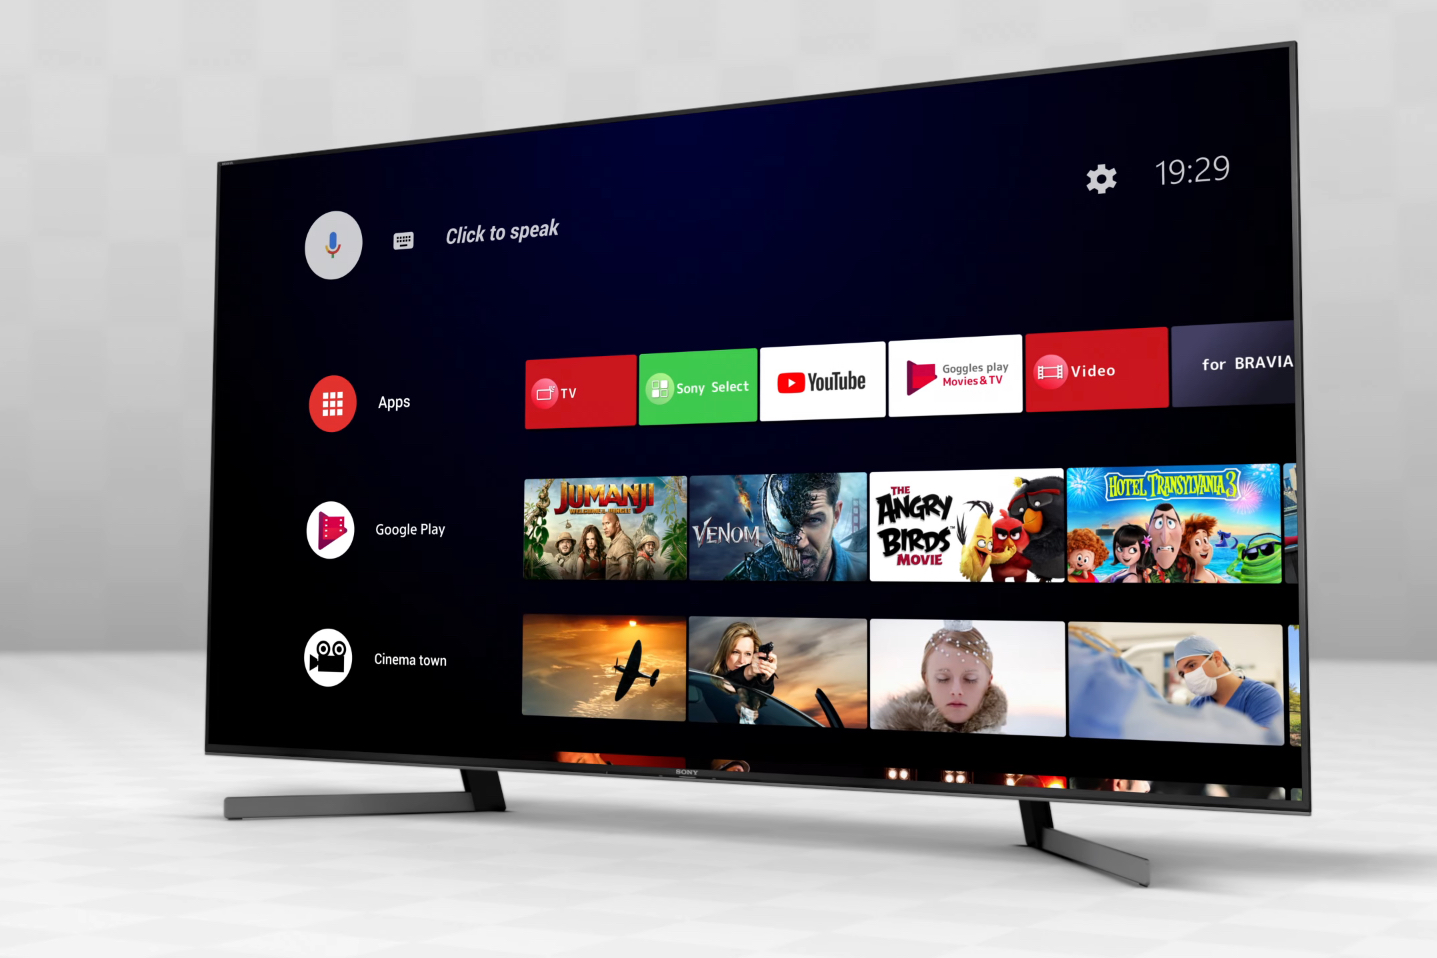 What's the difference between a Smart TV and Android TV?